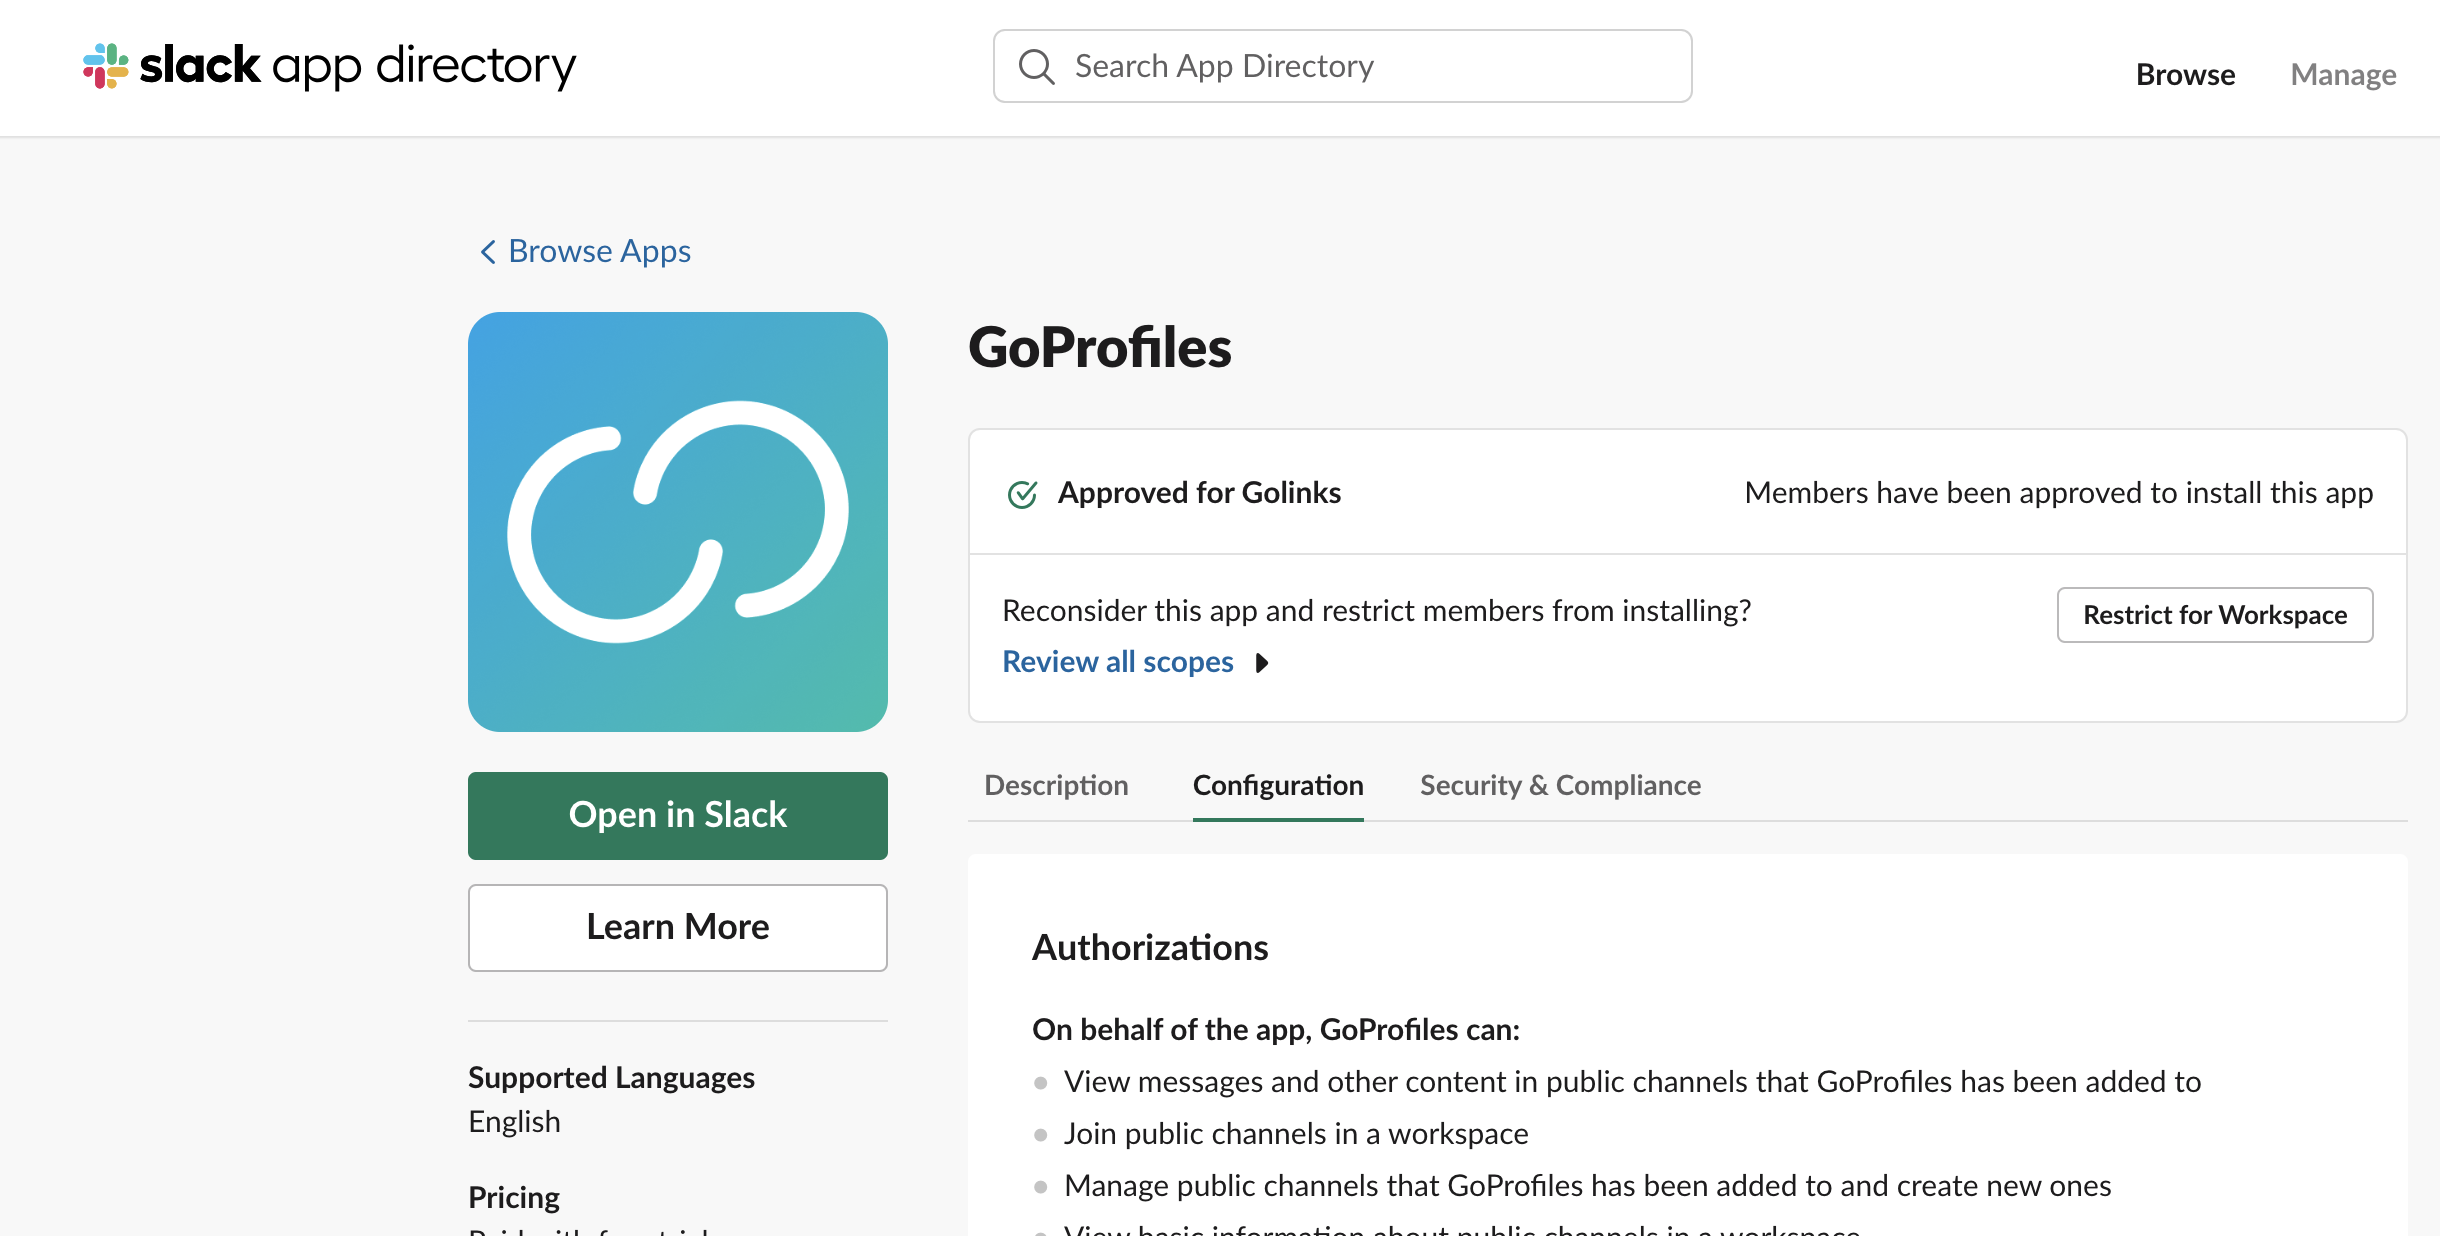 Slack app directory page for GoProfiles